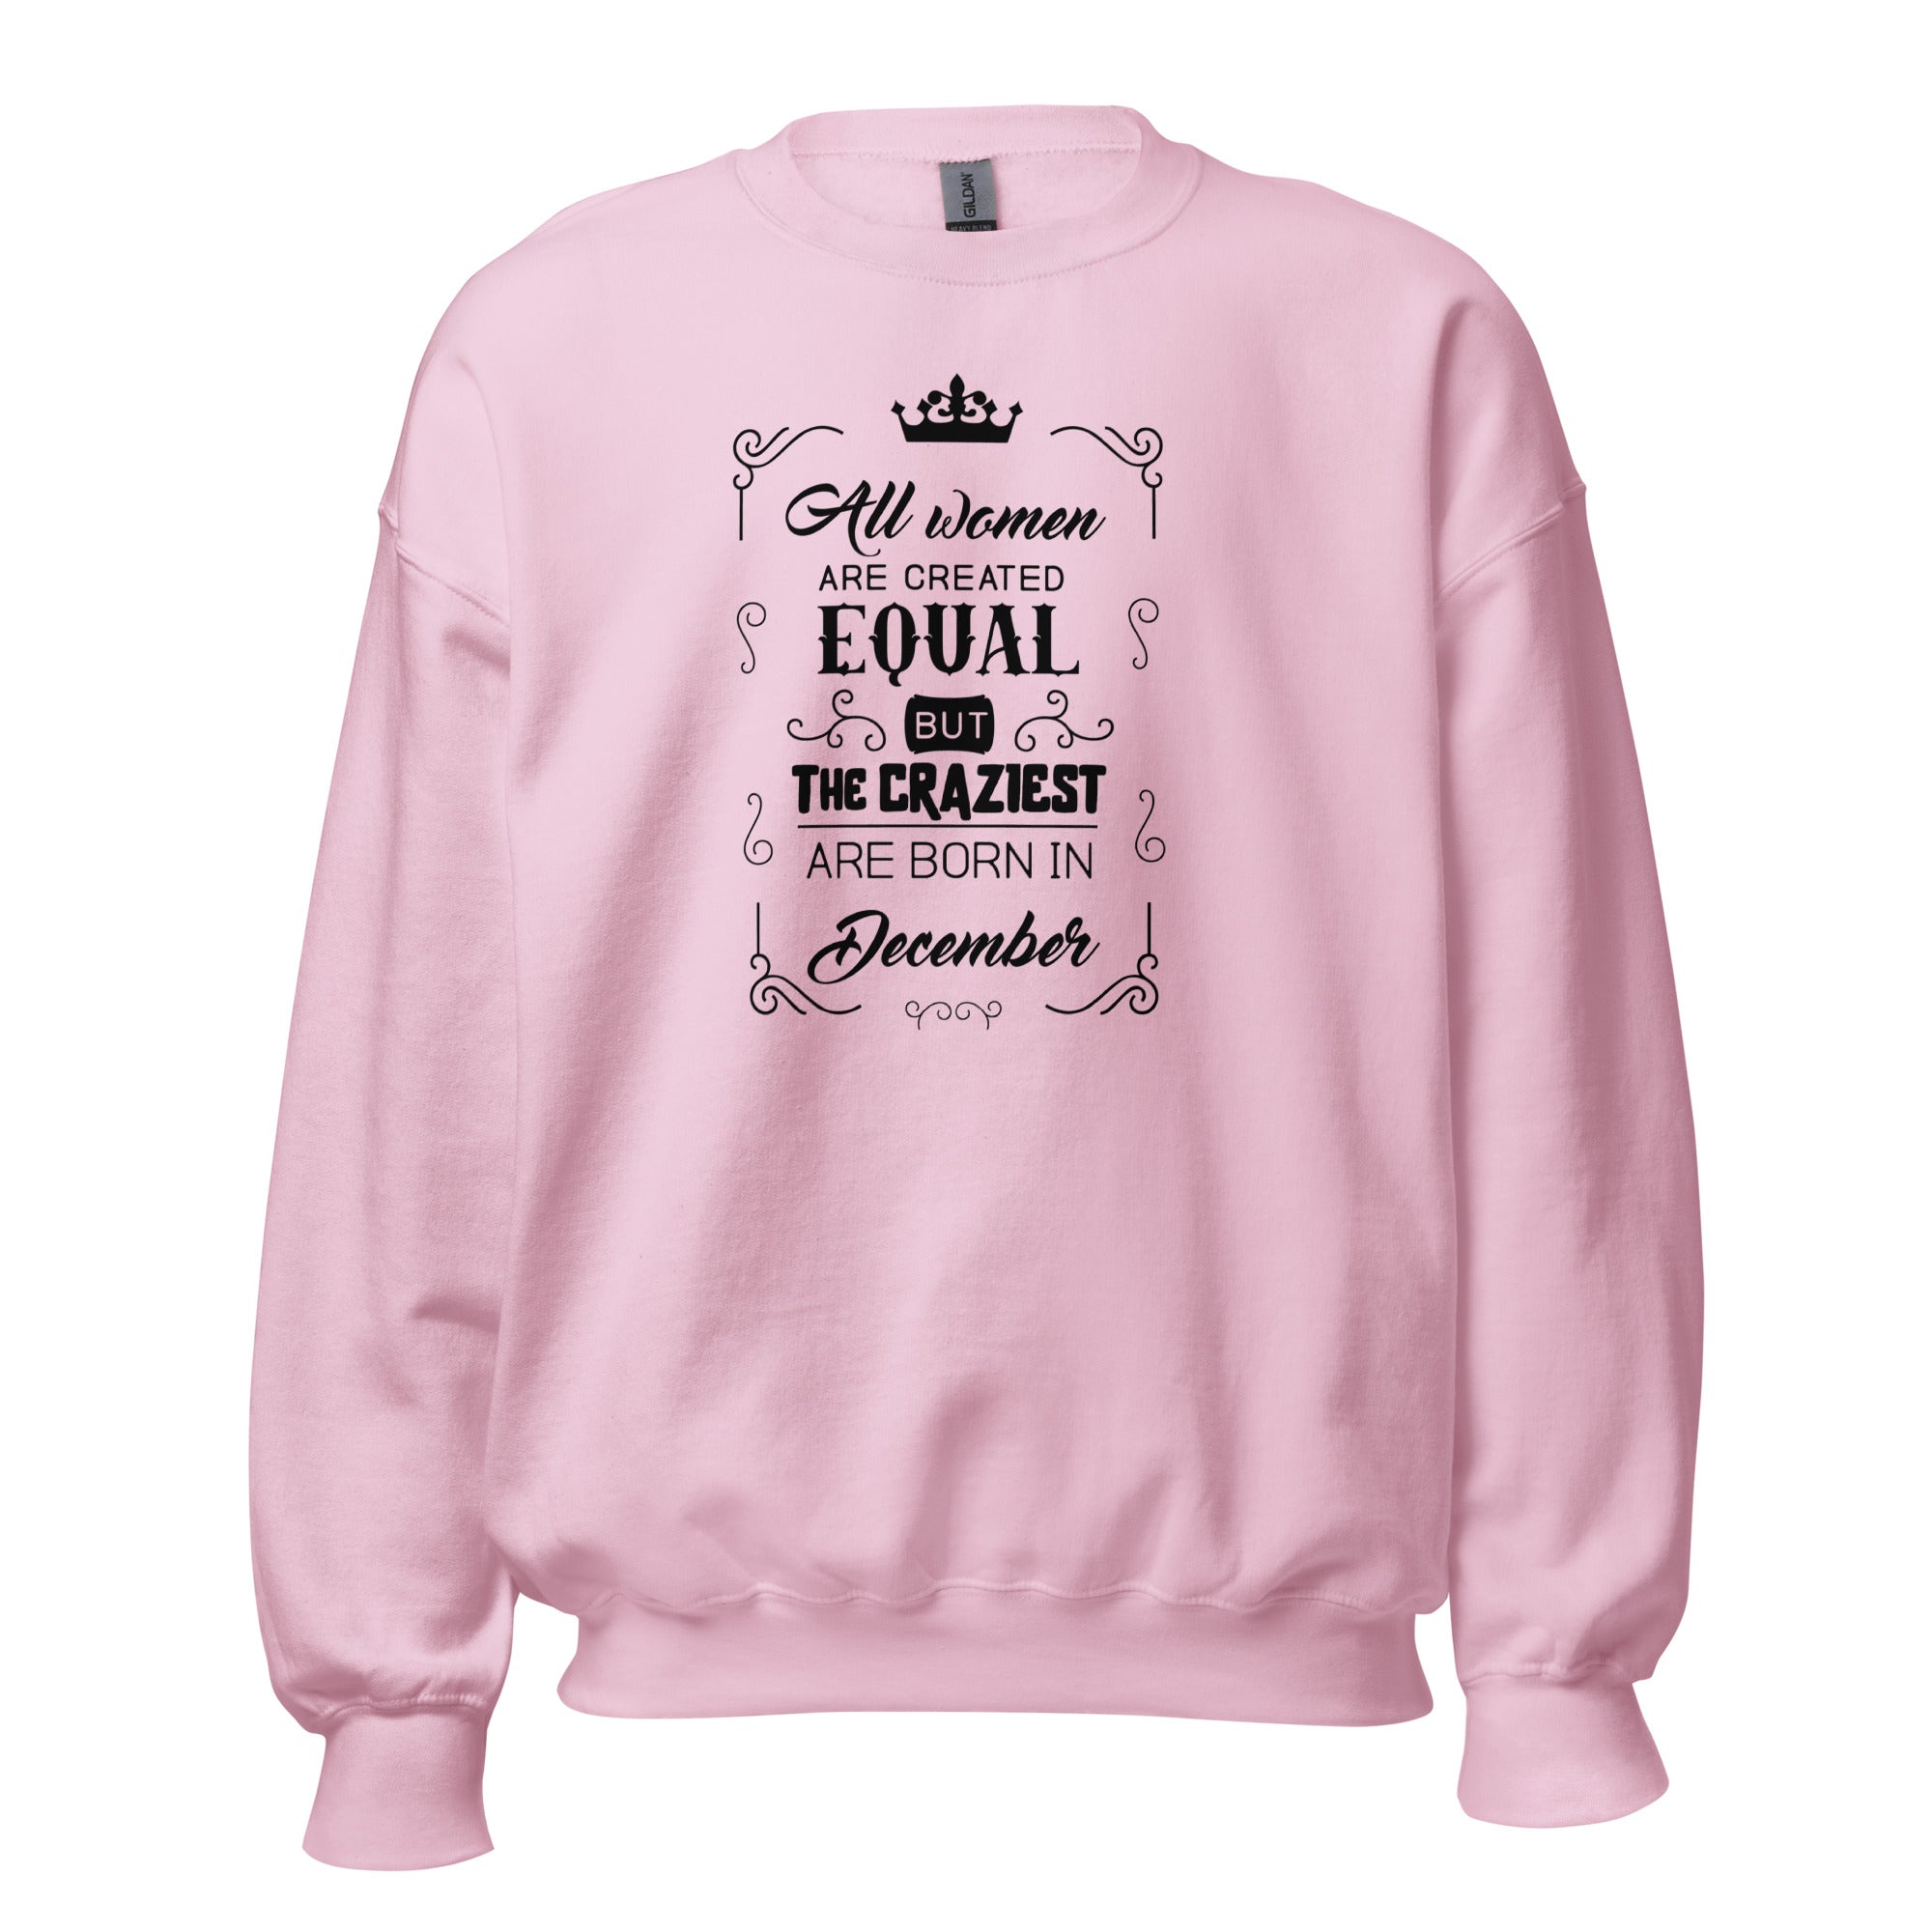 Women's Crew Neck Sweatshirt - All Women Are Created Equal But The Craziest Are Born In December - GRAPHIC T-SHIRTS